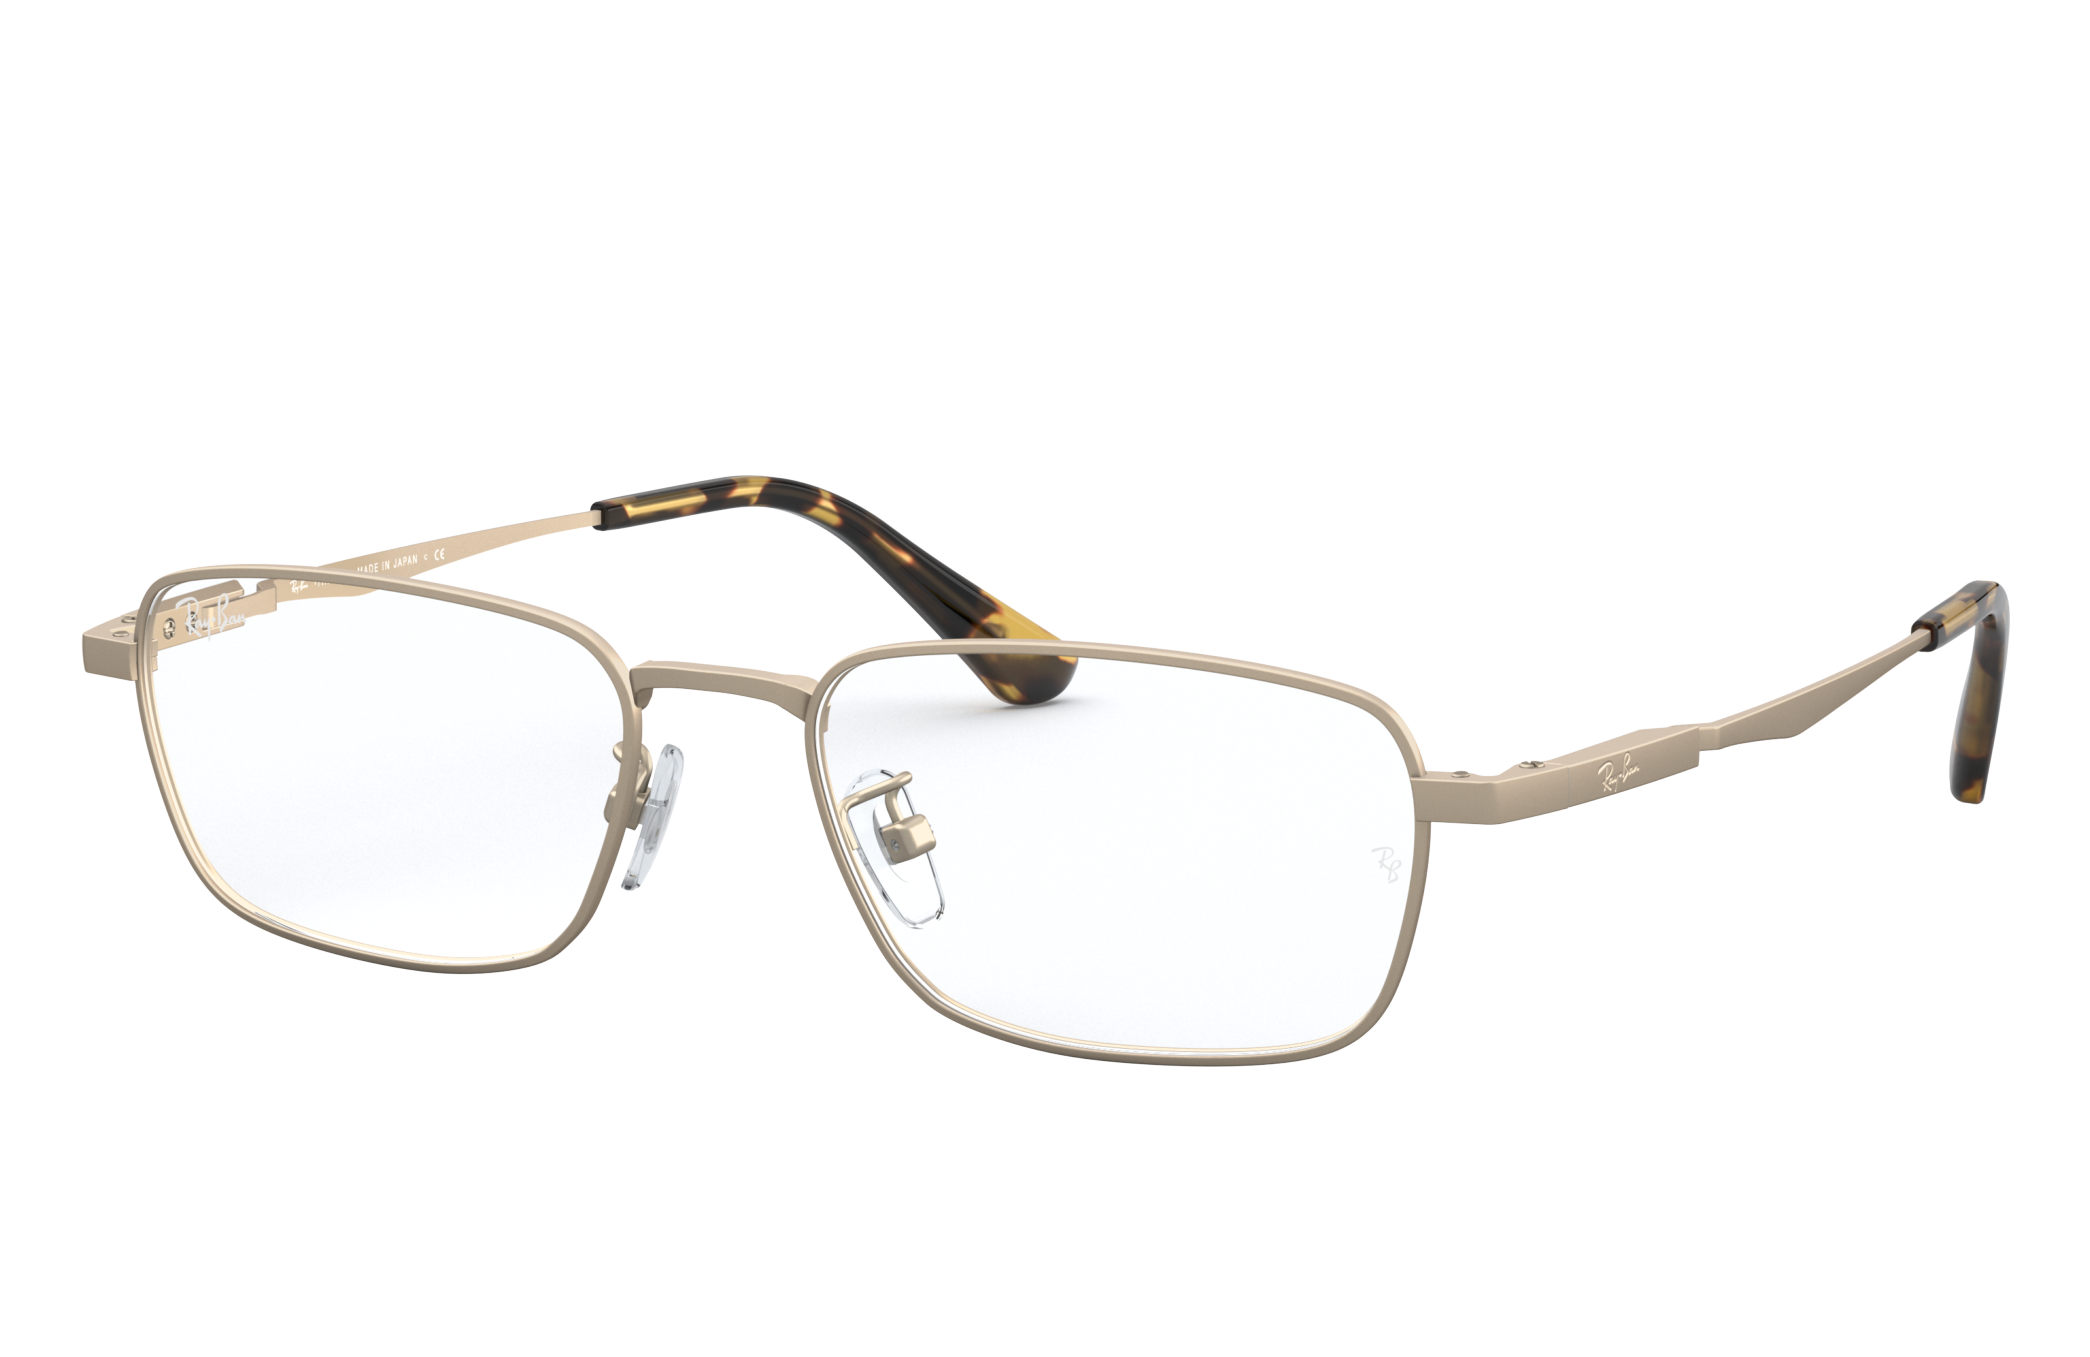 white and gold ray bans